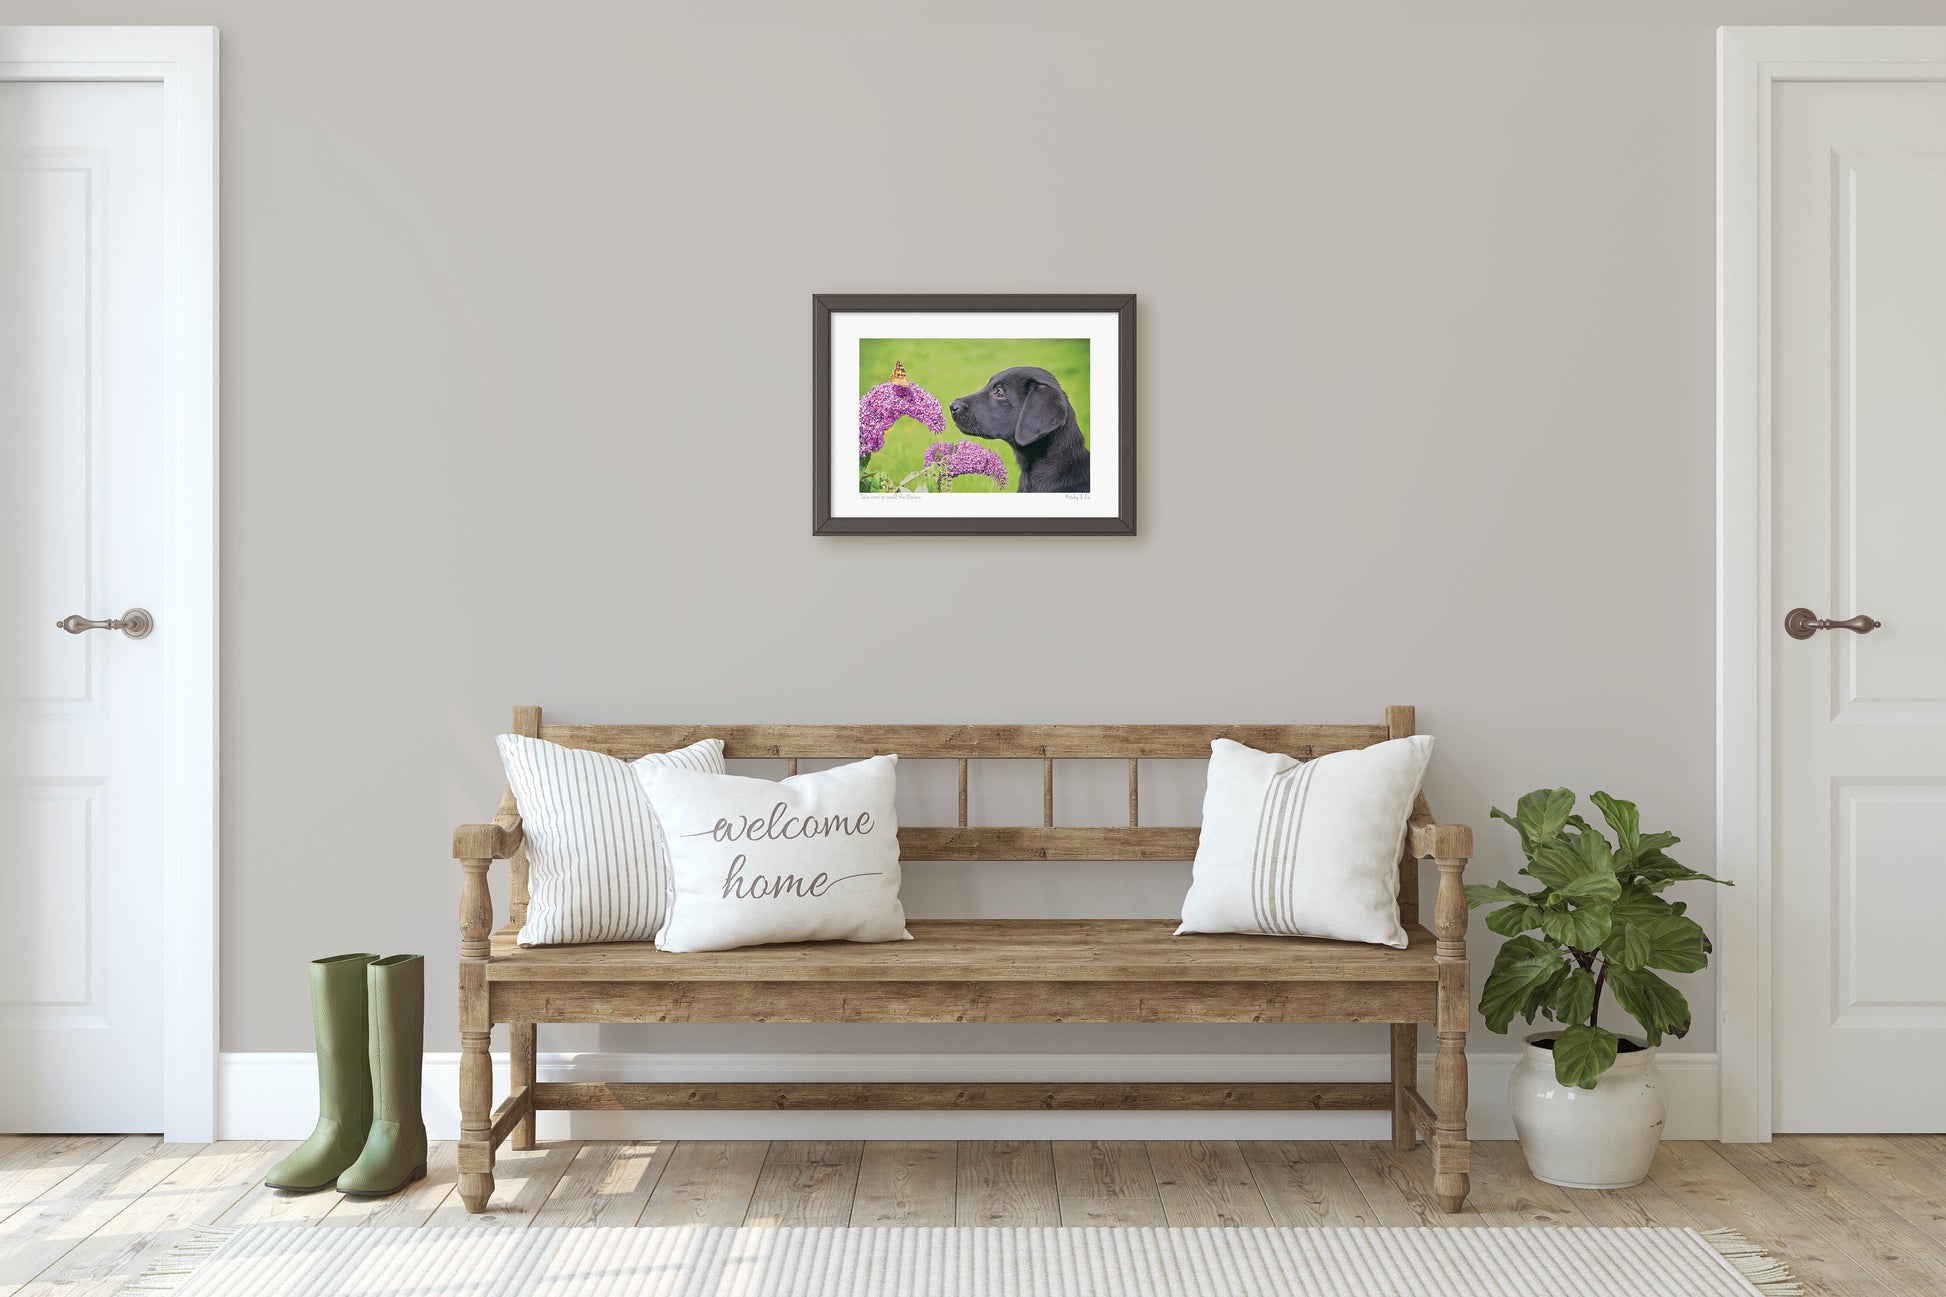 Labrador and Butterfly Print - Take time to smell the flowers - Kitchy & Co print